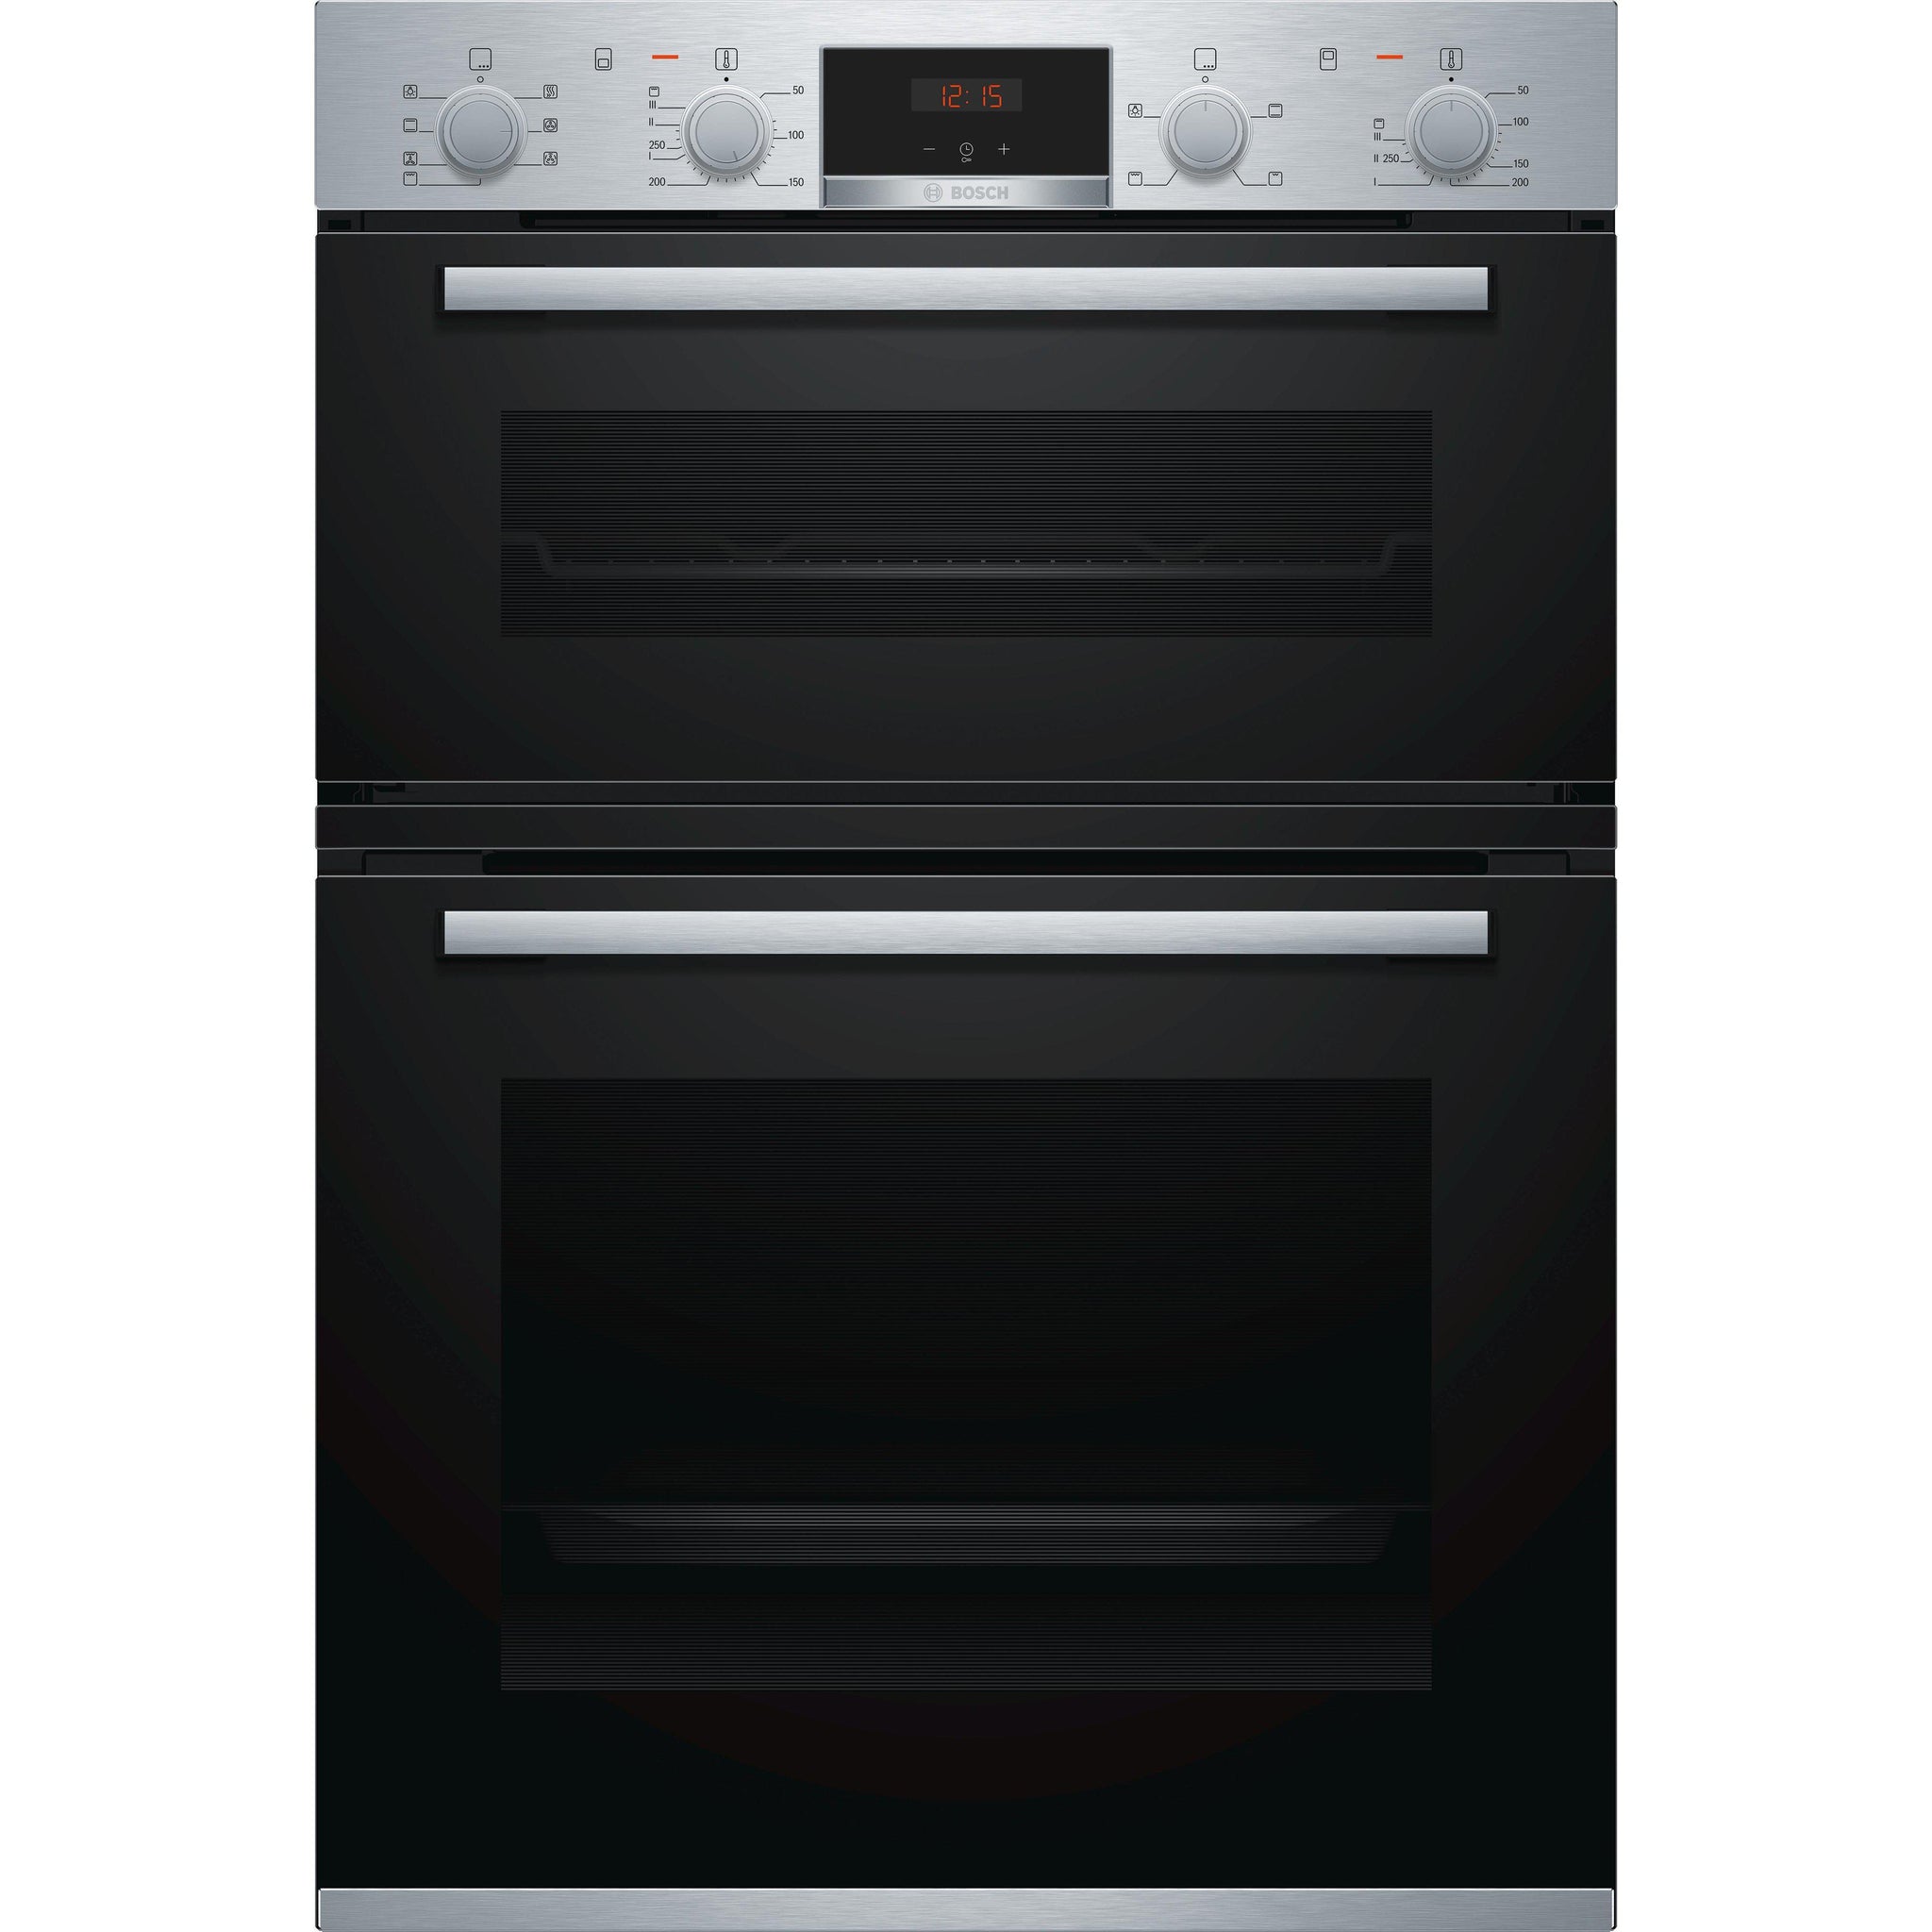 Bosch Mbs533bs0b Serie 4 Builtin Electric Double Oven Euronics